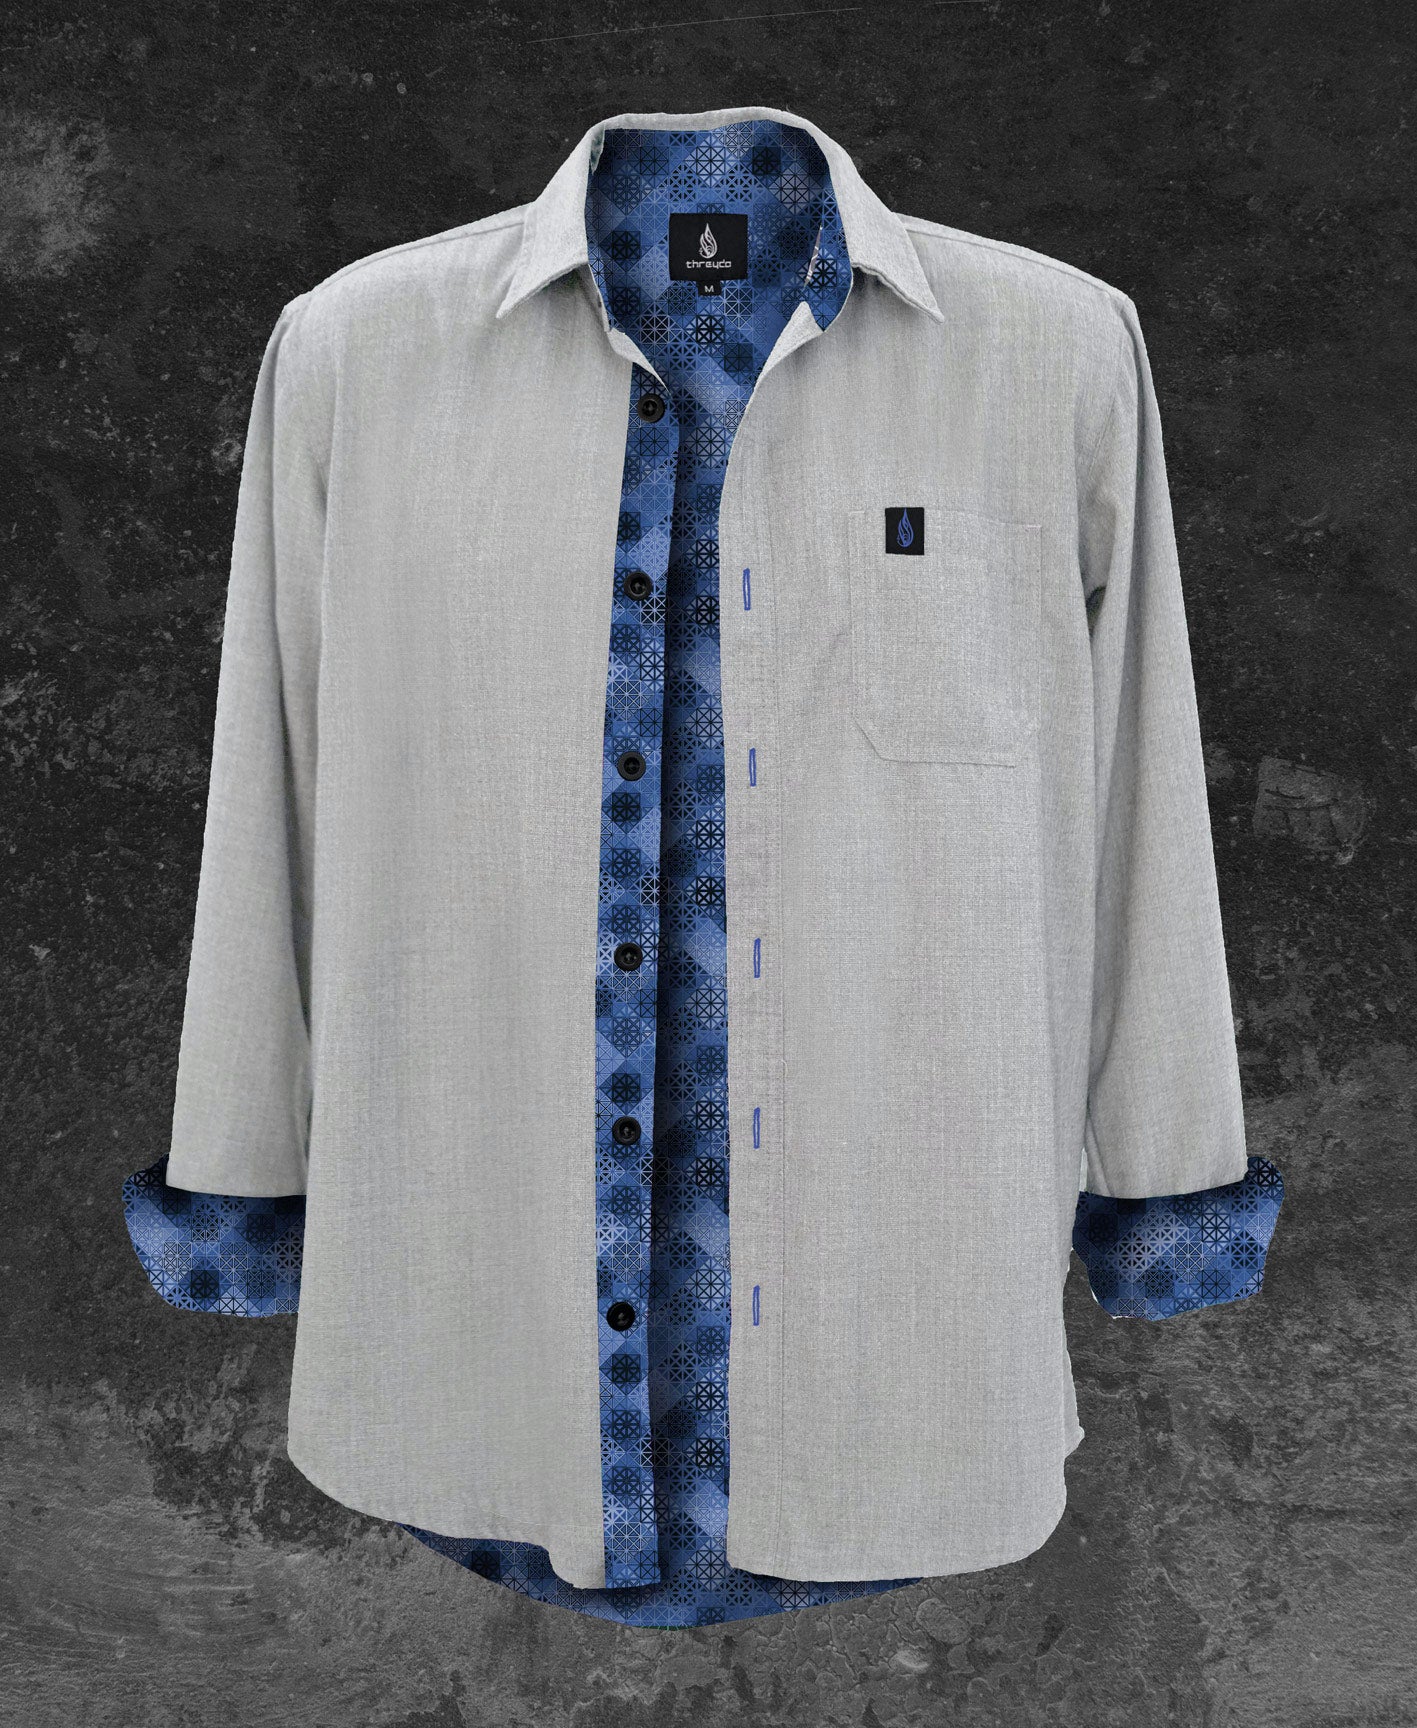 Ultraviolet Lined Button Down Shirt by Threyda - Ships April